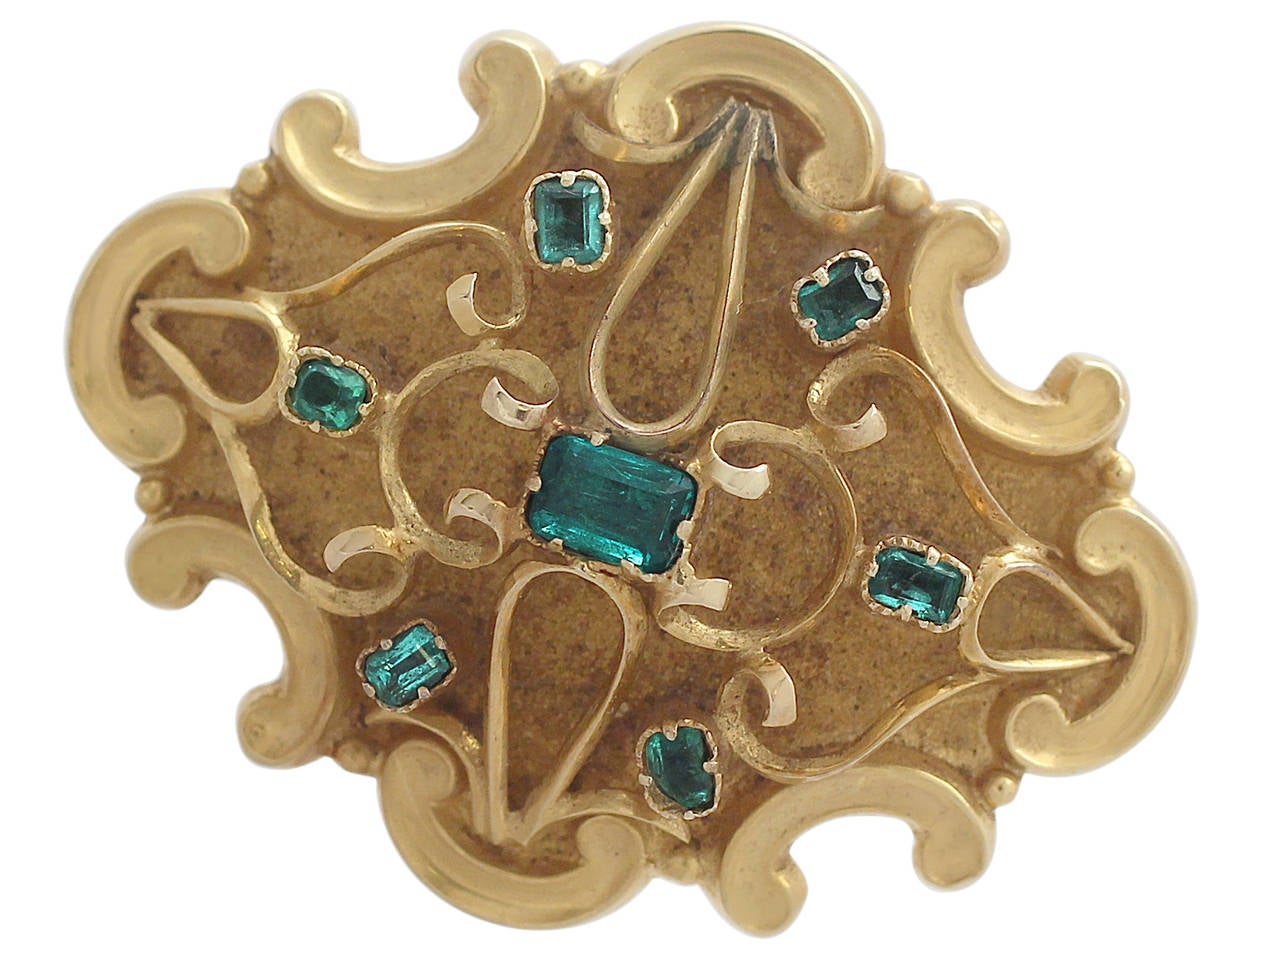 A fine and impressive antique Victorian 0.62 carat emerald and 18 karat yellow gold mourning brooch; part of our antique jewelry and estate jewelry collections

This impressive antique Victorian mourning brooch* has been crafted in 18k yellow